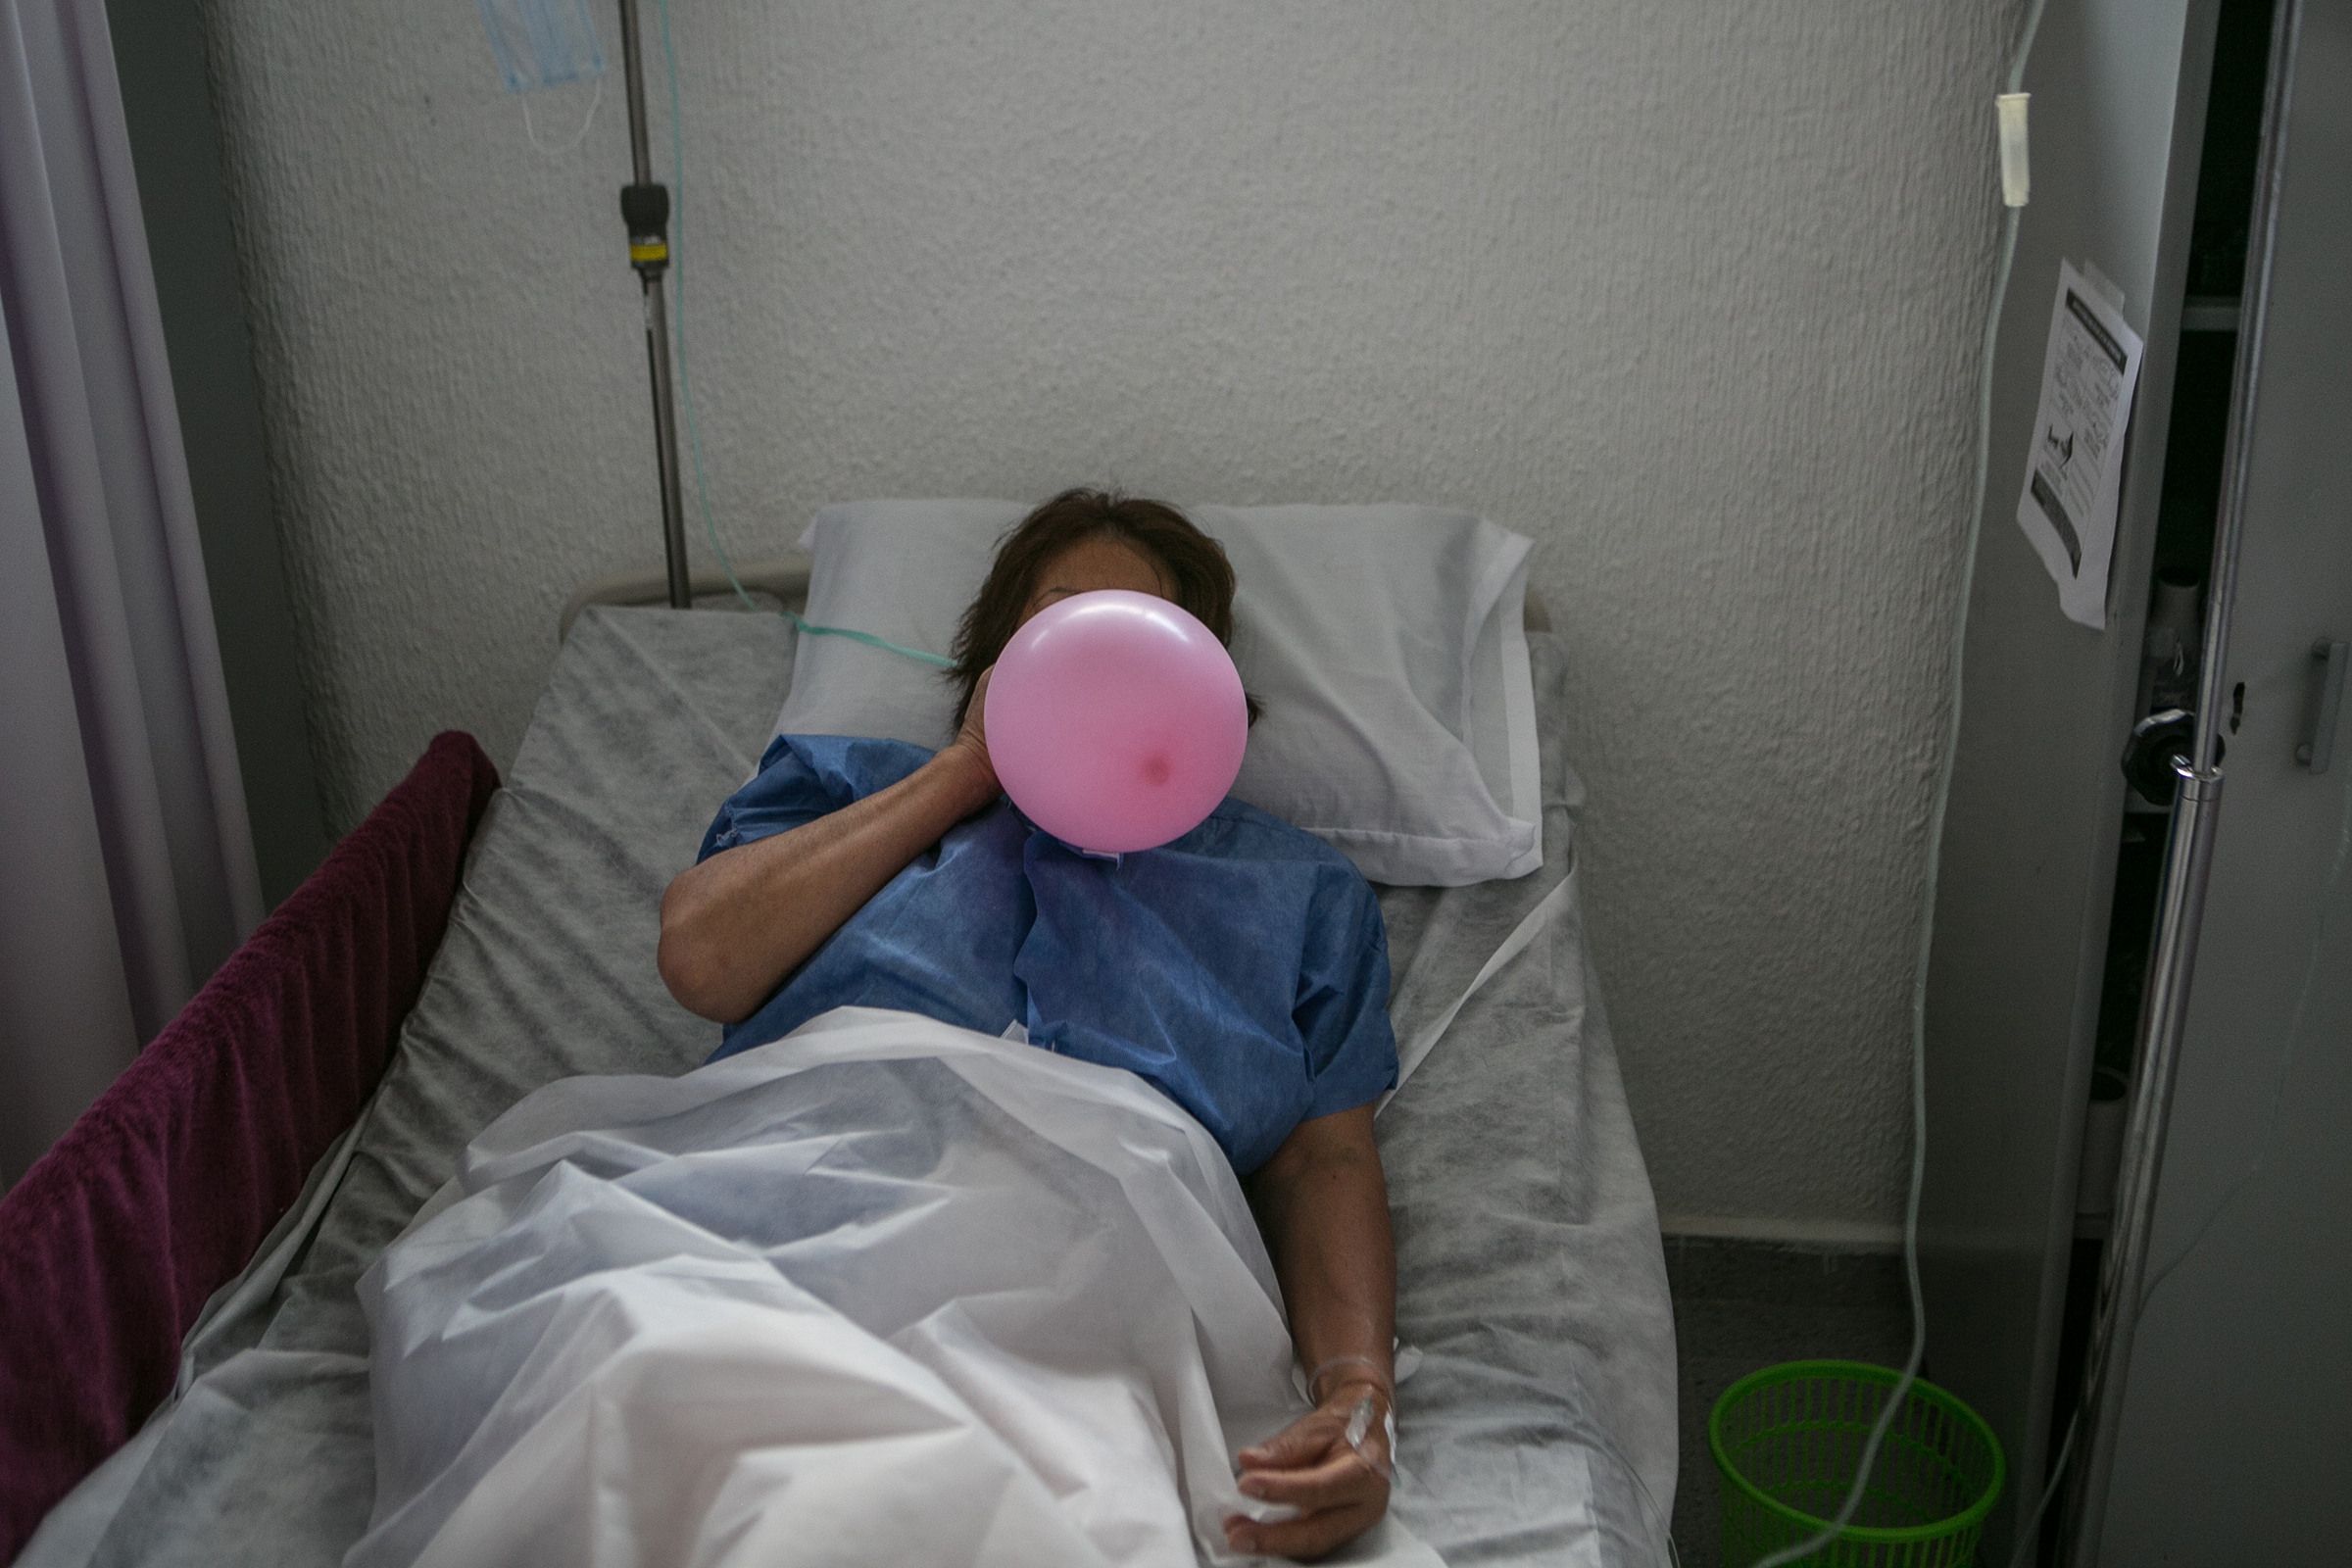 A coronavirus patient uses a balloon to strengthen her lungs as she recovers at a makeshift hospital in Mexico City on June 30, 2020.